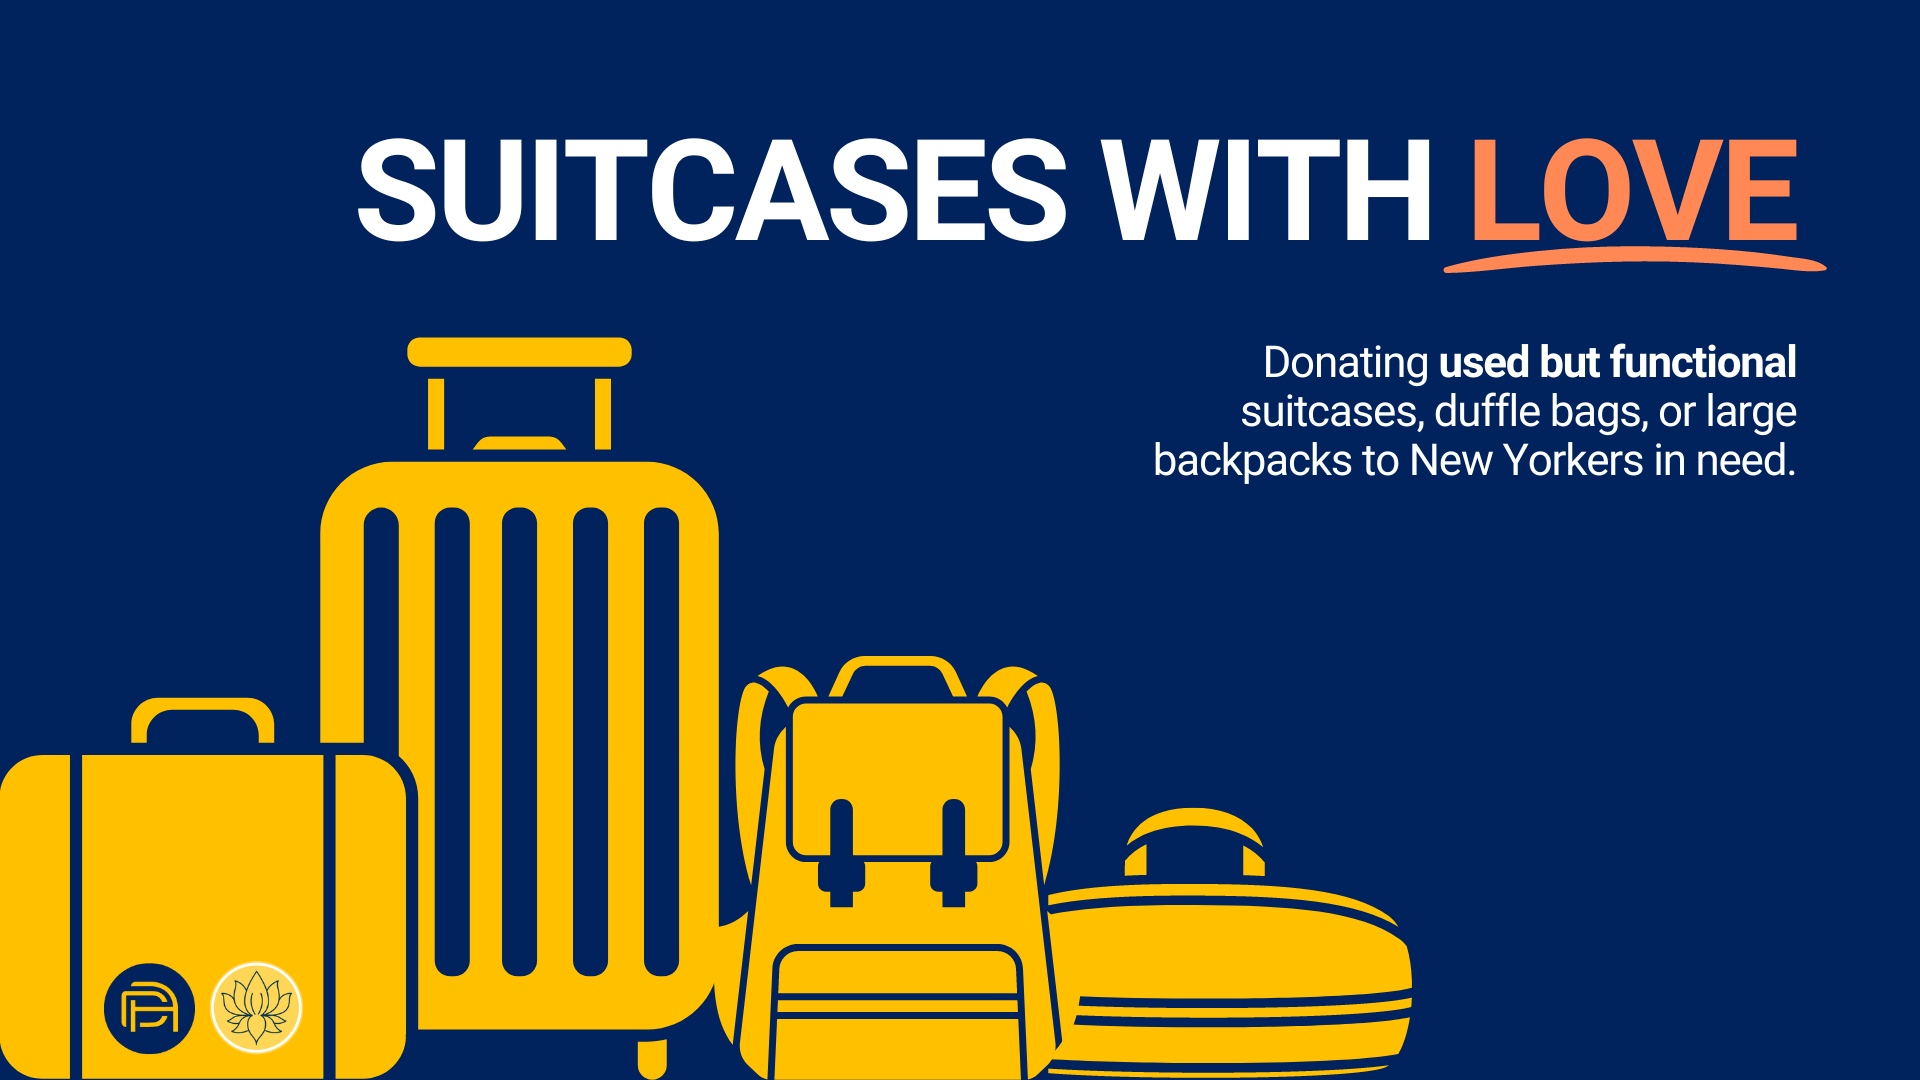 Suitcases with Love